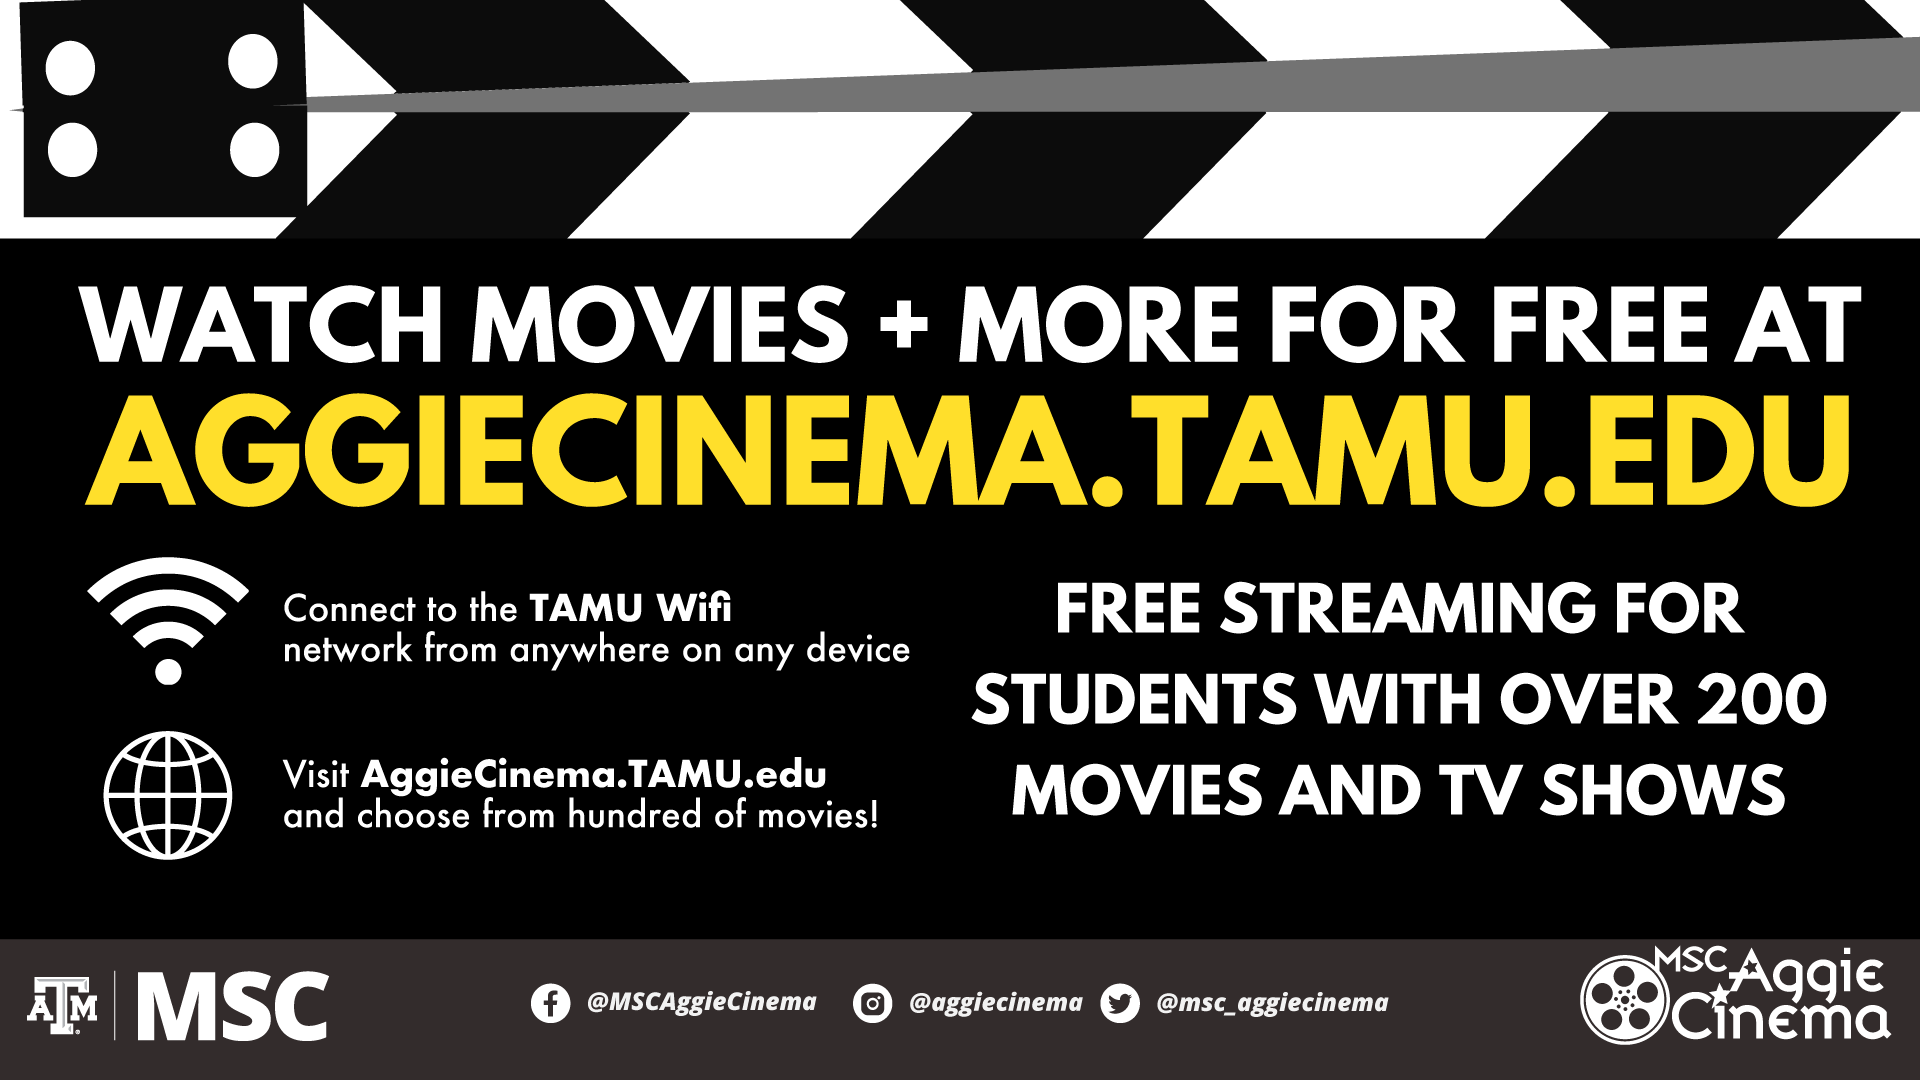 Watch Movies and More for free at Aggiecinema.tamu.edu Connect to the TAMU Wifi network from anywhere on any device. Visit AggieCinema.tamu.edu and choose from hundred of movies! Free Streaming for students with over 200 movies and tv shows. Facebook: MSCAggieCinema ; Instagram: aggiecinema; Twitter: msc_aggiecinema